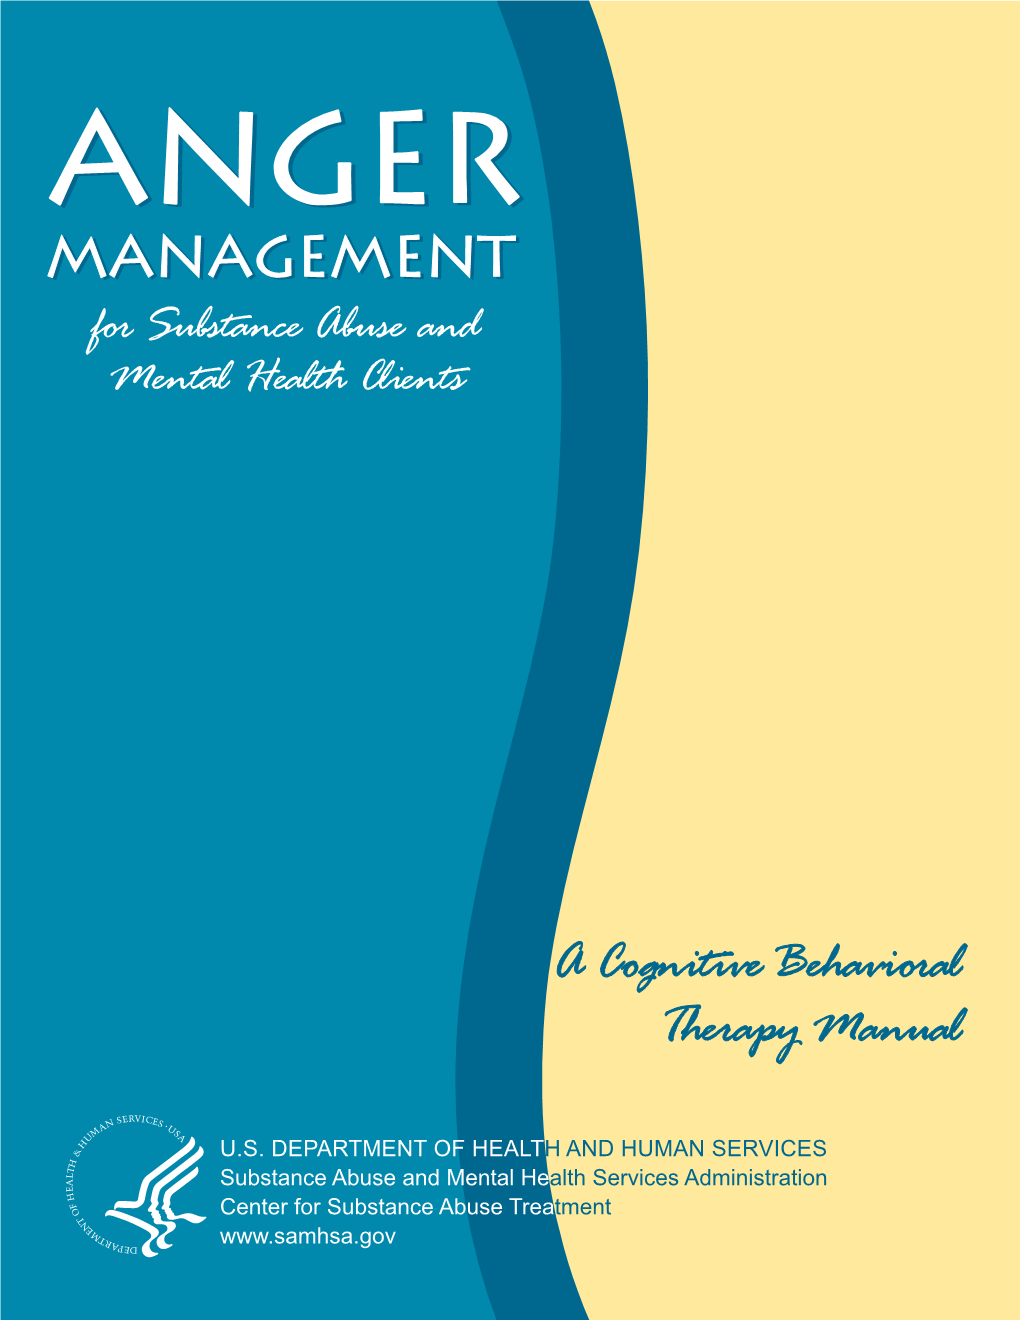 Anger Management for Substance Abuse and Mental Health Clients: a Cognitive Behavioral Therapy Manual